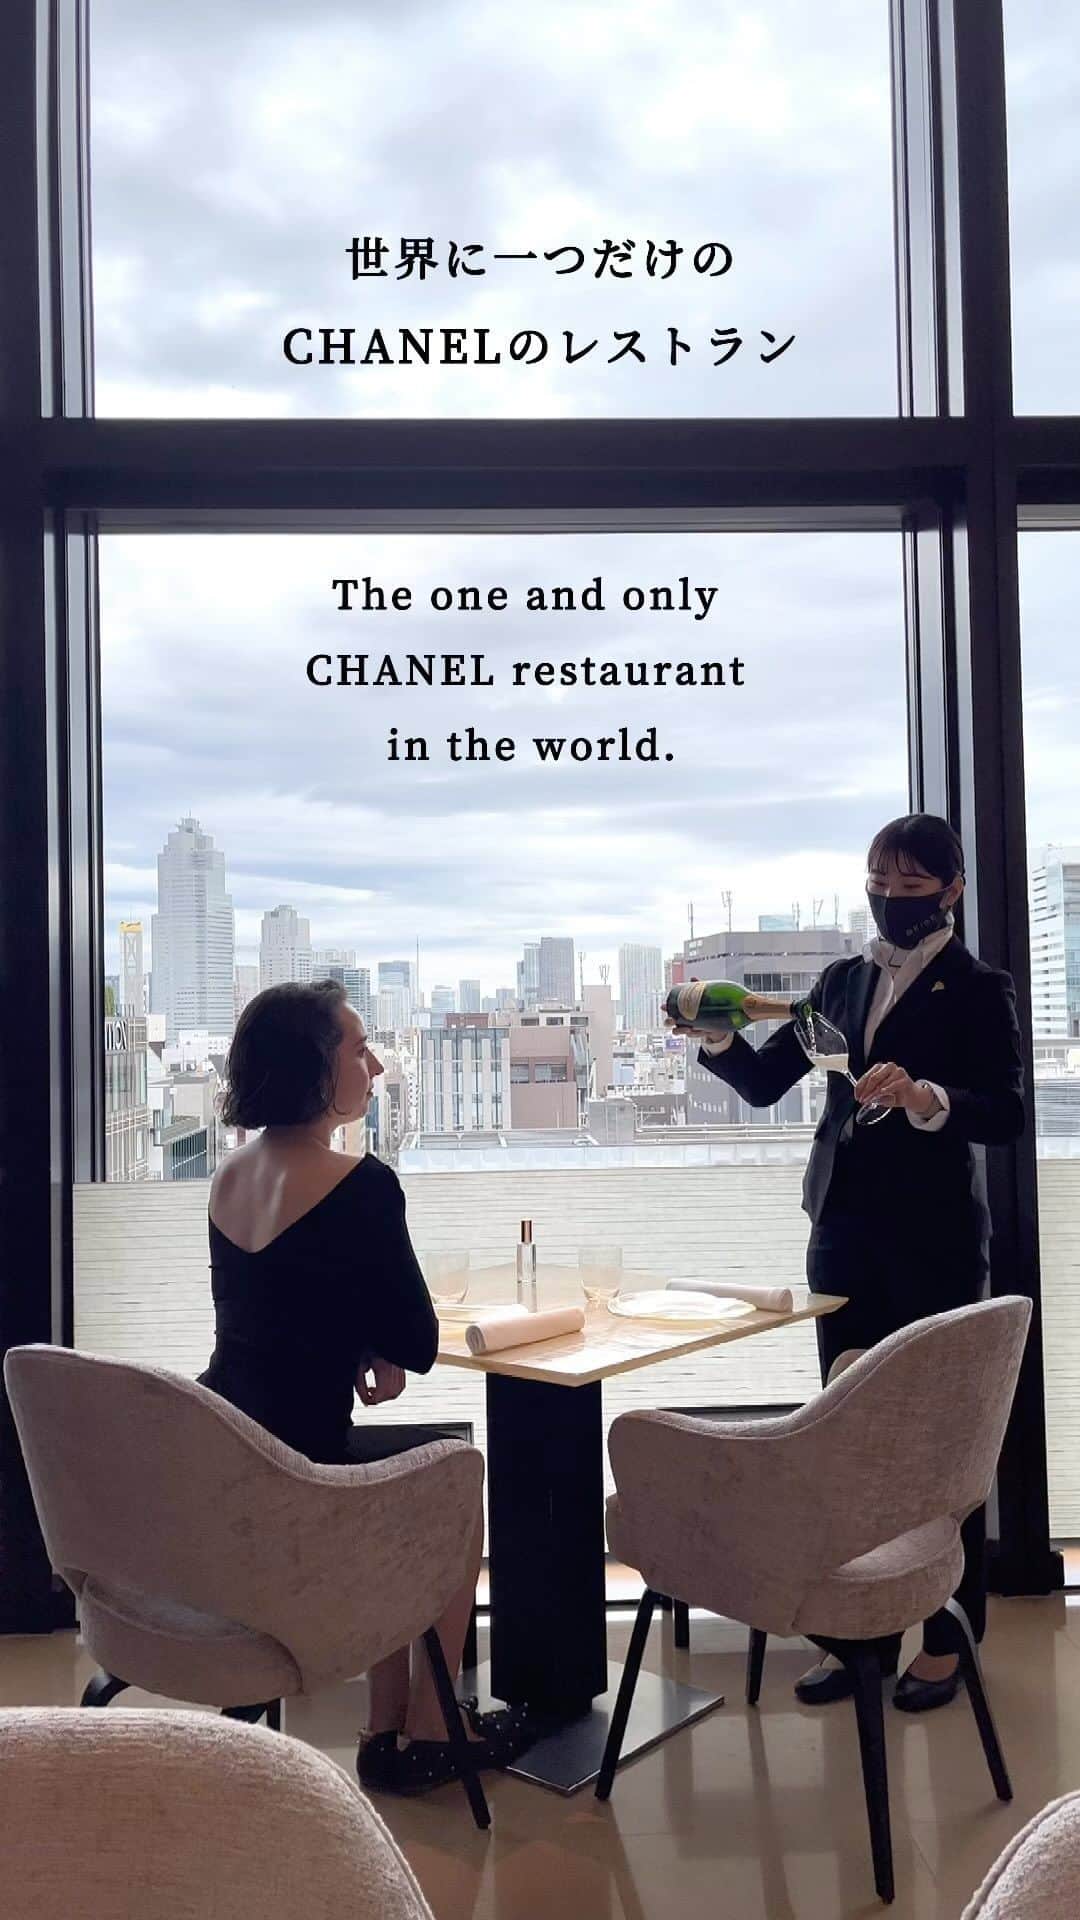 斉藤アリスのインスタグラム：「BEIGE ALAIN DUCASSE TOKYO @ GINZA @beige_restaurant   Did you know that there is only one CHANEL restaurant in the world in Tokyo?  The restaurant used to have a high threshold with a price per customer exceeding 50,000 yen.  It was renovated in April 2023, and now both lunch and dinner can be enjoyed for less than 20,000 yen.  The cuisine is produced by Alain Ducasse, a master of French cuisine.  I was very satisfied with the food, which uses a lot of vegetables and is good for the body.  The restaurant is decorated with CHANEL artwork that can only be found here in the world.  There is a rooftop bar on the upper floor.  I believe this is the only place in Tokyo where you can drink by the glass precious magnum bottles of champagne collected from all over the world.  Champagne ages in the bottle, so the bigger the bottle, the better it tastes.  The rooftop is very popular in summer, so I recommend getting there early.  世界に一つだけのCHANELのレストランが 東京にあるって知っていましたか？ @beige_restaurant   これまでは客単価5万円超えで なかなかに敷居が高かったお店。  2023年4月にリニューアルして、 ランチもディナーも1万円台で 楽しめるようになりました✨  お料理を手がけているのは フランス料理界の巨匠 アラン・デュカスさん。  お野菜をたくさん使っていて 体にも優しい料理で、 私は大大大満足でした🫶 女の子には嬉しいよねぇ☺️  店内にはCHANELのエスプリが 散りばめられています。  マトラッセ柄の大理石テーブル、 シャネルベージュで統一された店内、 通路には世界でもここにしかない シャネルのアート作品が並んでいます。  さらに屋上にはCHANELの ルーフトップバーも🍸  世界中からかき集めた貴重な マグナムボトルのシャンパンが グラスで飲めるのは、 東京でもココだけだと思う！  シャンパンは瓶内熟成するので 大きい瓶であればあるほど美味しくなる✨  これからの季節、ルーフトップは 争奪戦になりそうなので 早めに行くことをお勧めします😉  #BEIGEALAINDUCASSETOKYO #ベージュアランデュカス東京 #ginzarestaurant #tokyo2023  #tokyorestaurant #tokyogourmet  #chanel #chaneltokyo #ALAINDUCASSE #東京デート #東京レストラン #finedining #日本 #japan #japón #japan2023 #銀座 #japan_vacations #japan_focus #tokyoguide #visitjapan #ginza #japanesegirl #japantrip #japanguide #tokyotrip #tokyotravel」